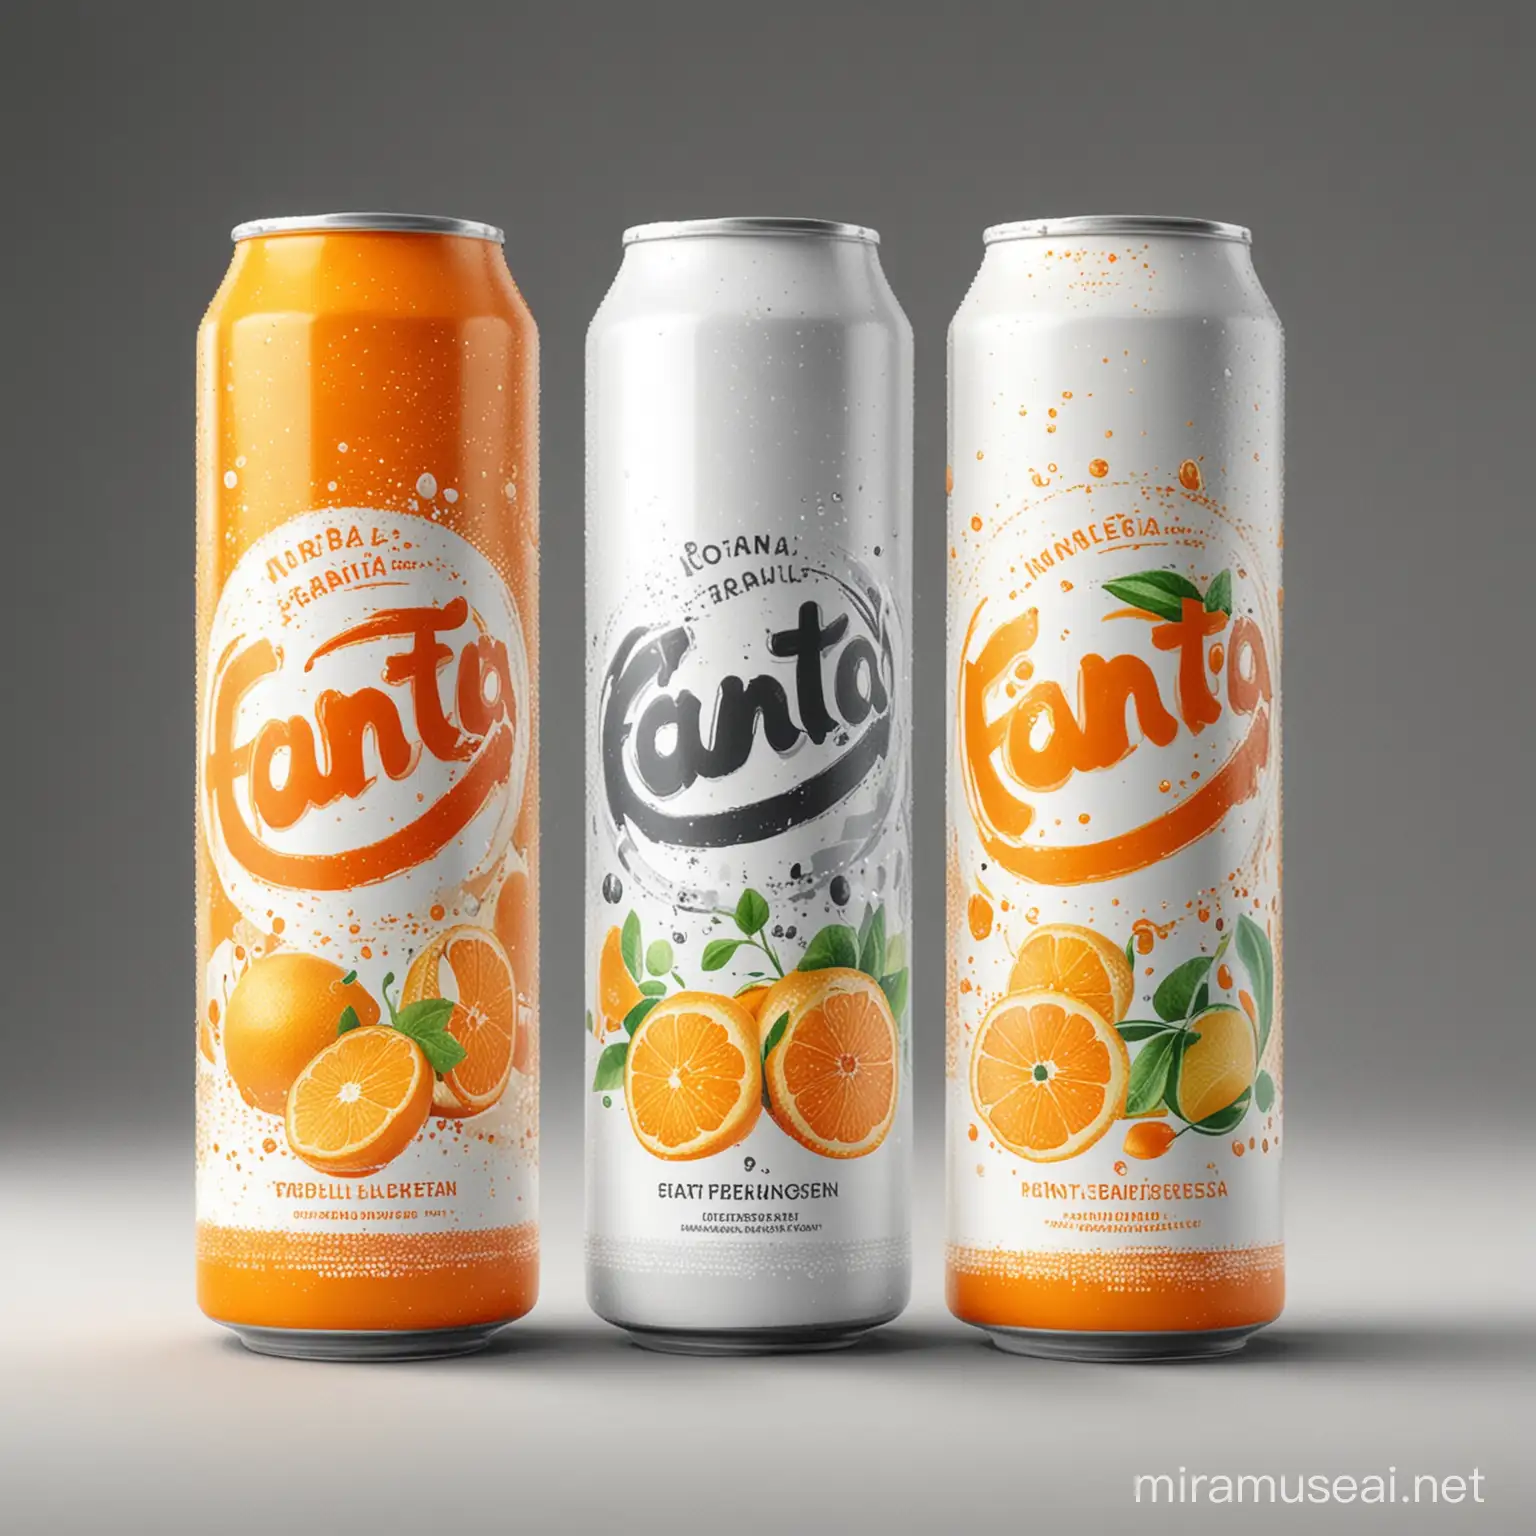 Premium Orange Carbonated Soft Drink Label with Engaging Images and Nutritional Information